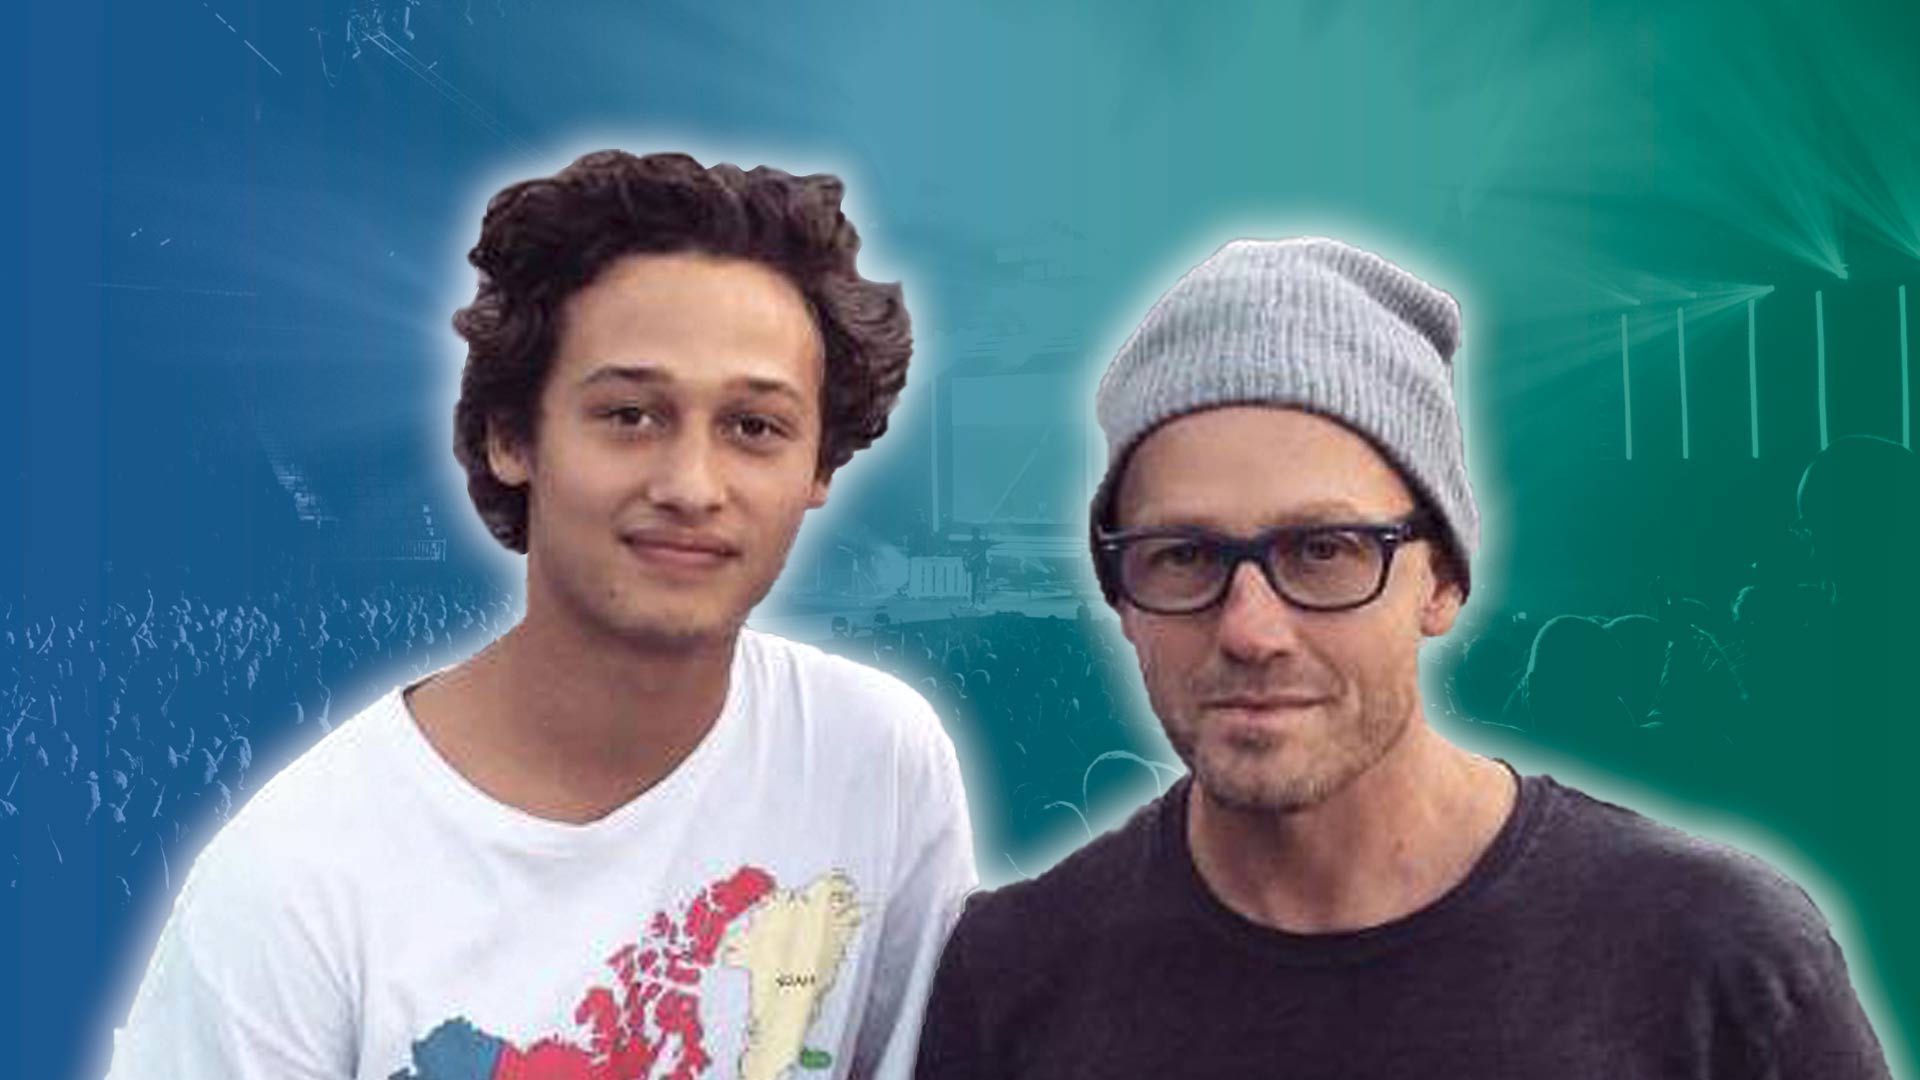 TobyMac Stopped Reading the Bible After Son Died, but God Drew Him